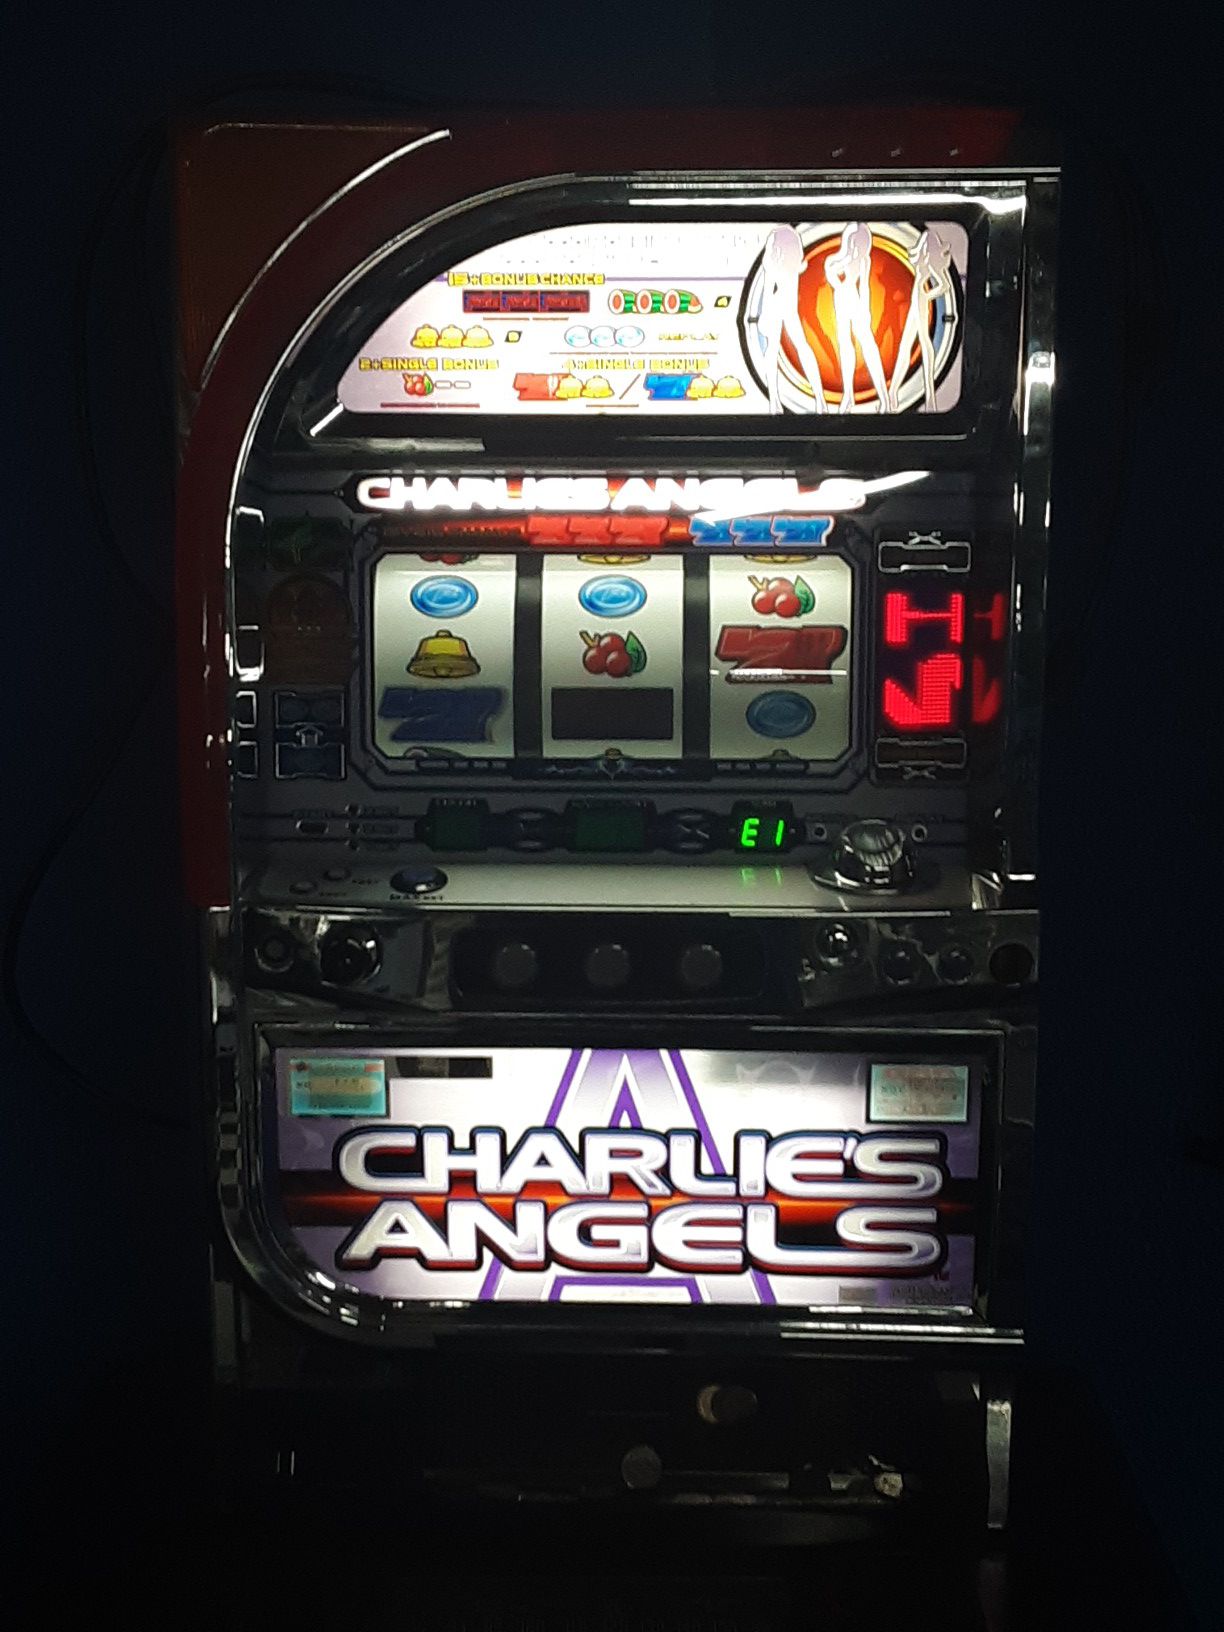 Vegas slot machine. Works most of the time. Sometimes it gets hung up with an error message so